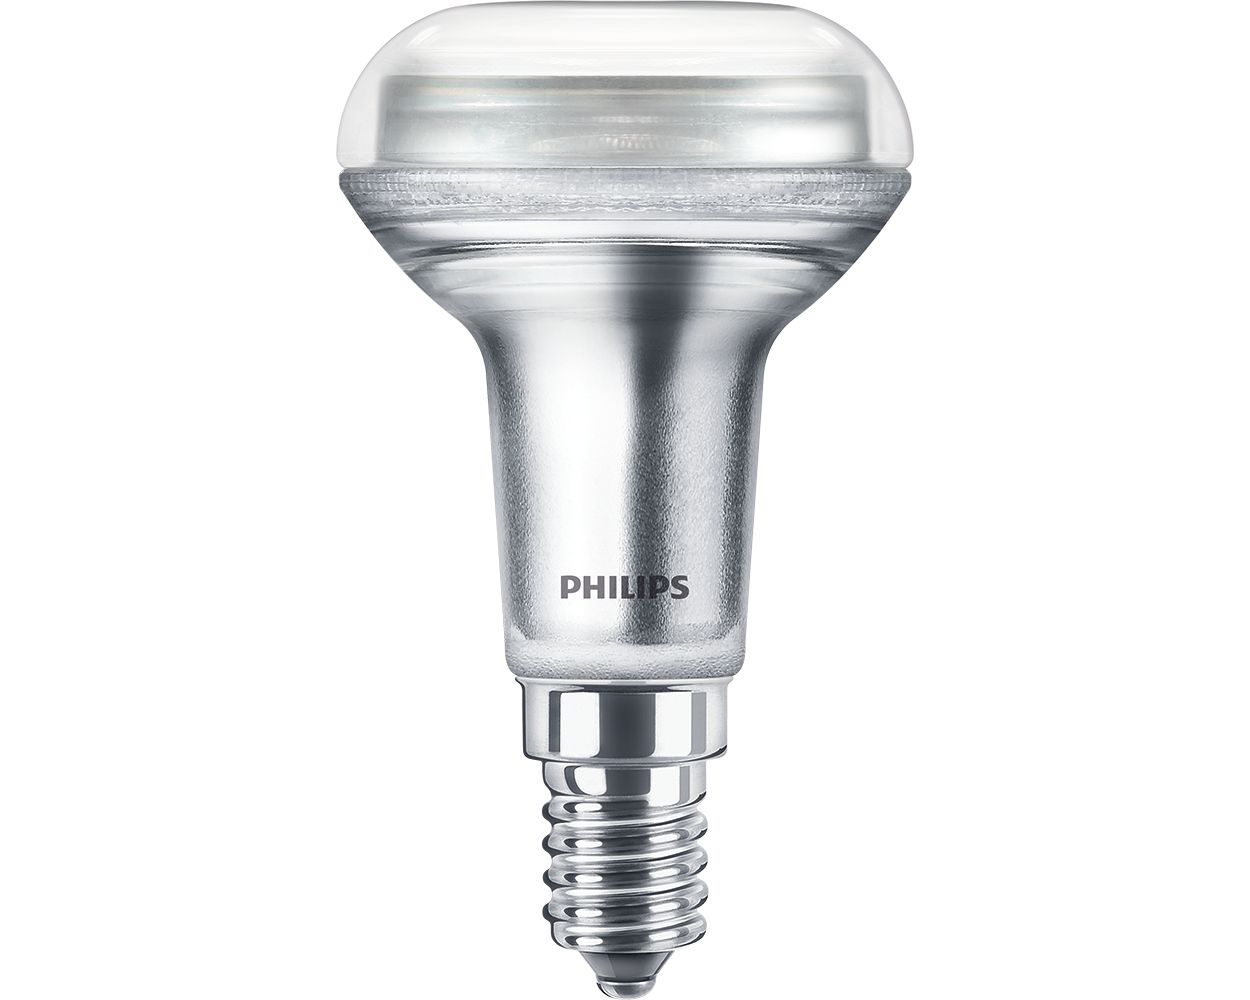 Extra Over instelling markering CoreProLEDspot ND2.8-40W R50 E14 827 36D | 929001891102 | Philips lighting